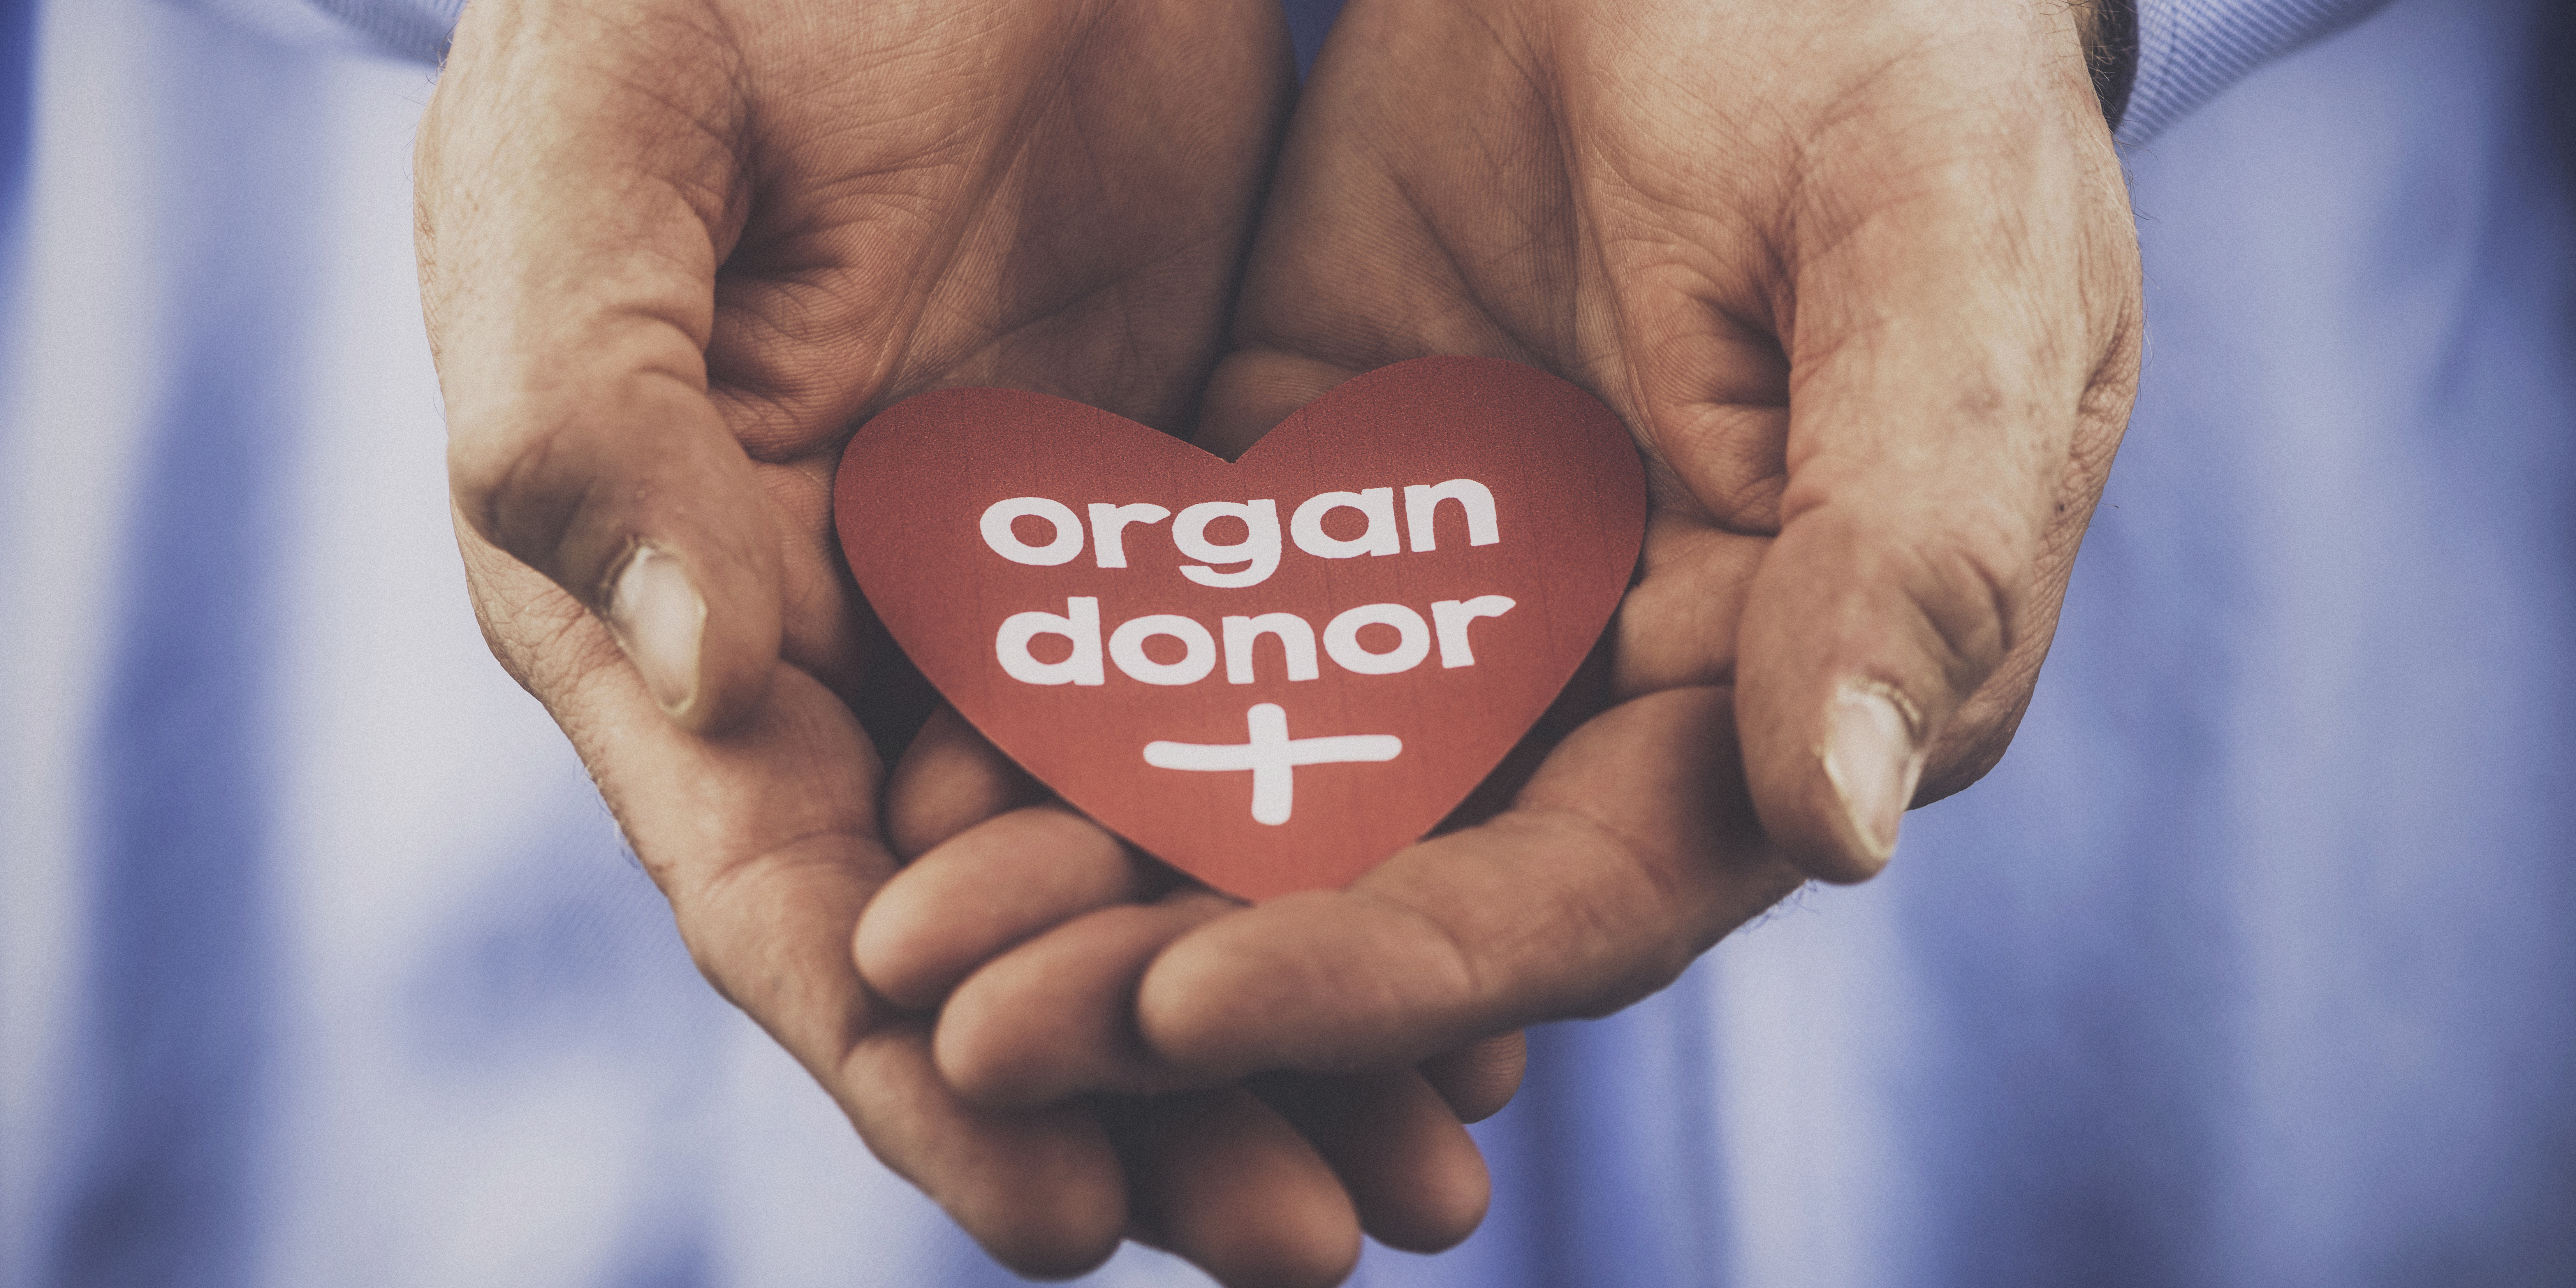 Reminder of the importance of being an organ donor